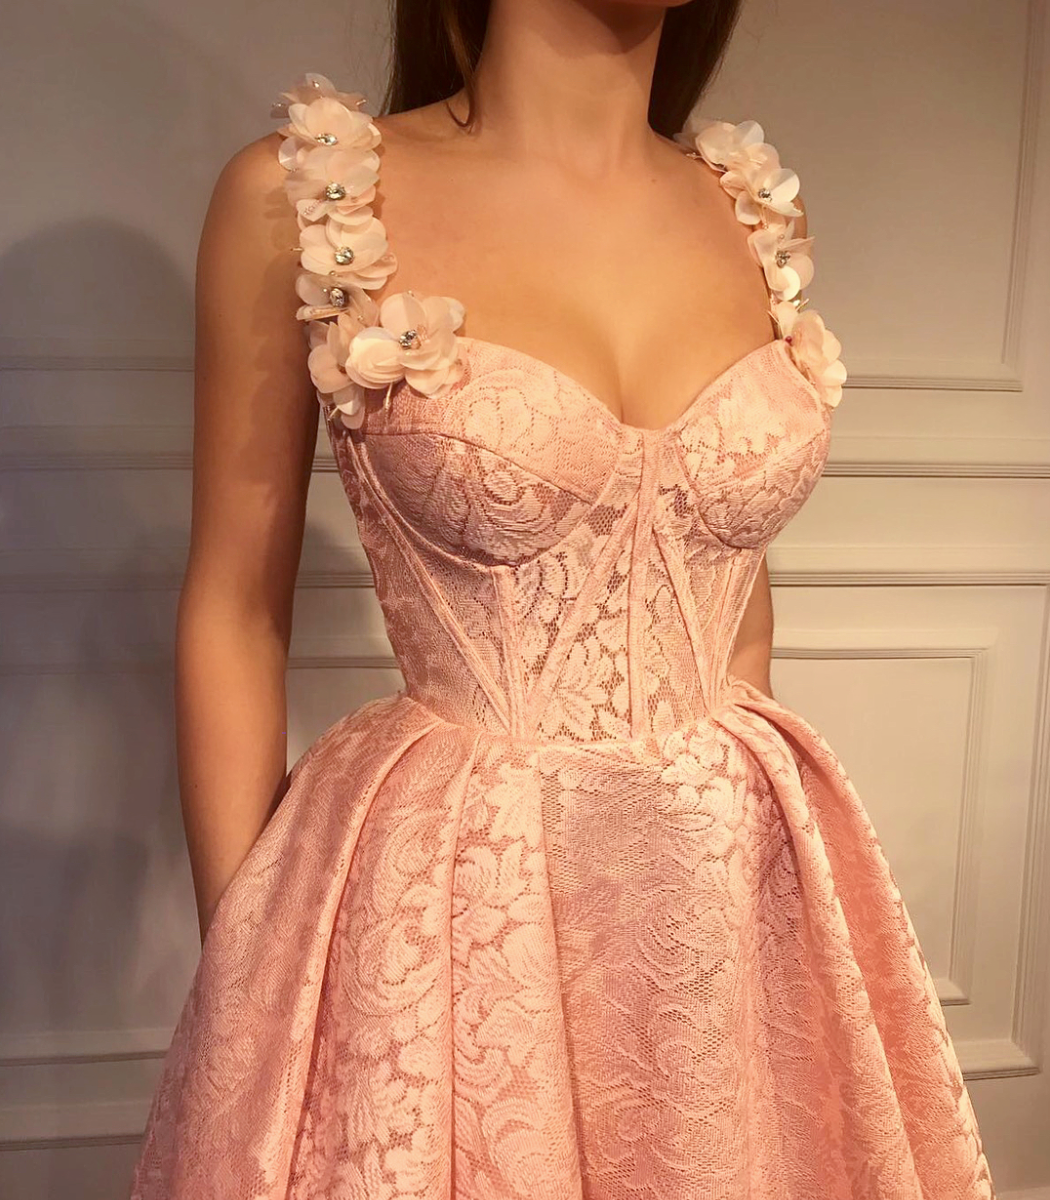 Pink A-Line dress with spaghetti straps and embroidery